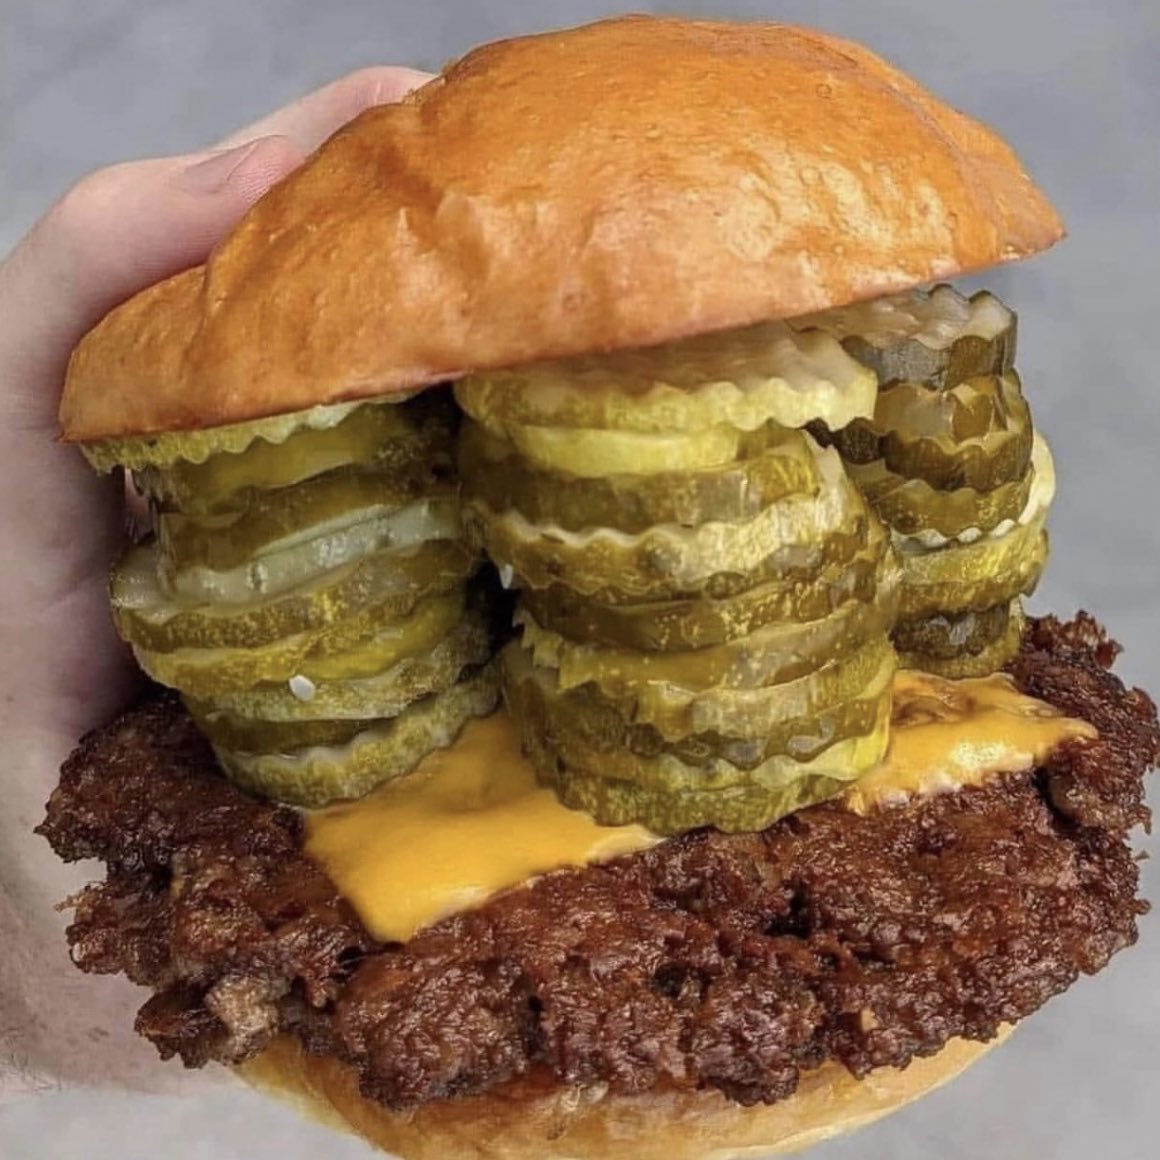 this is the correct pickle to burger ratio btw